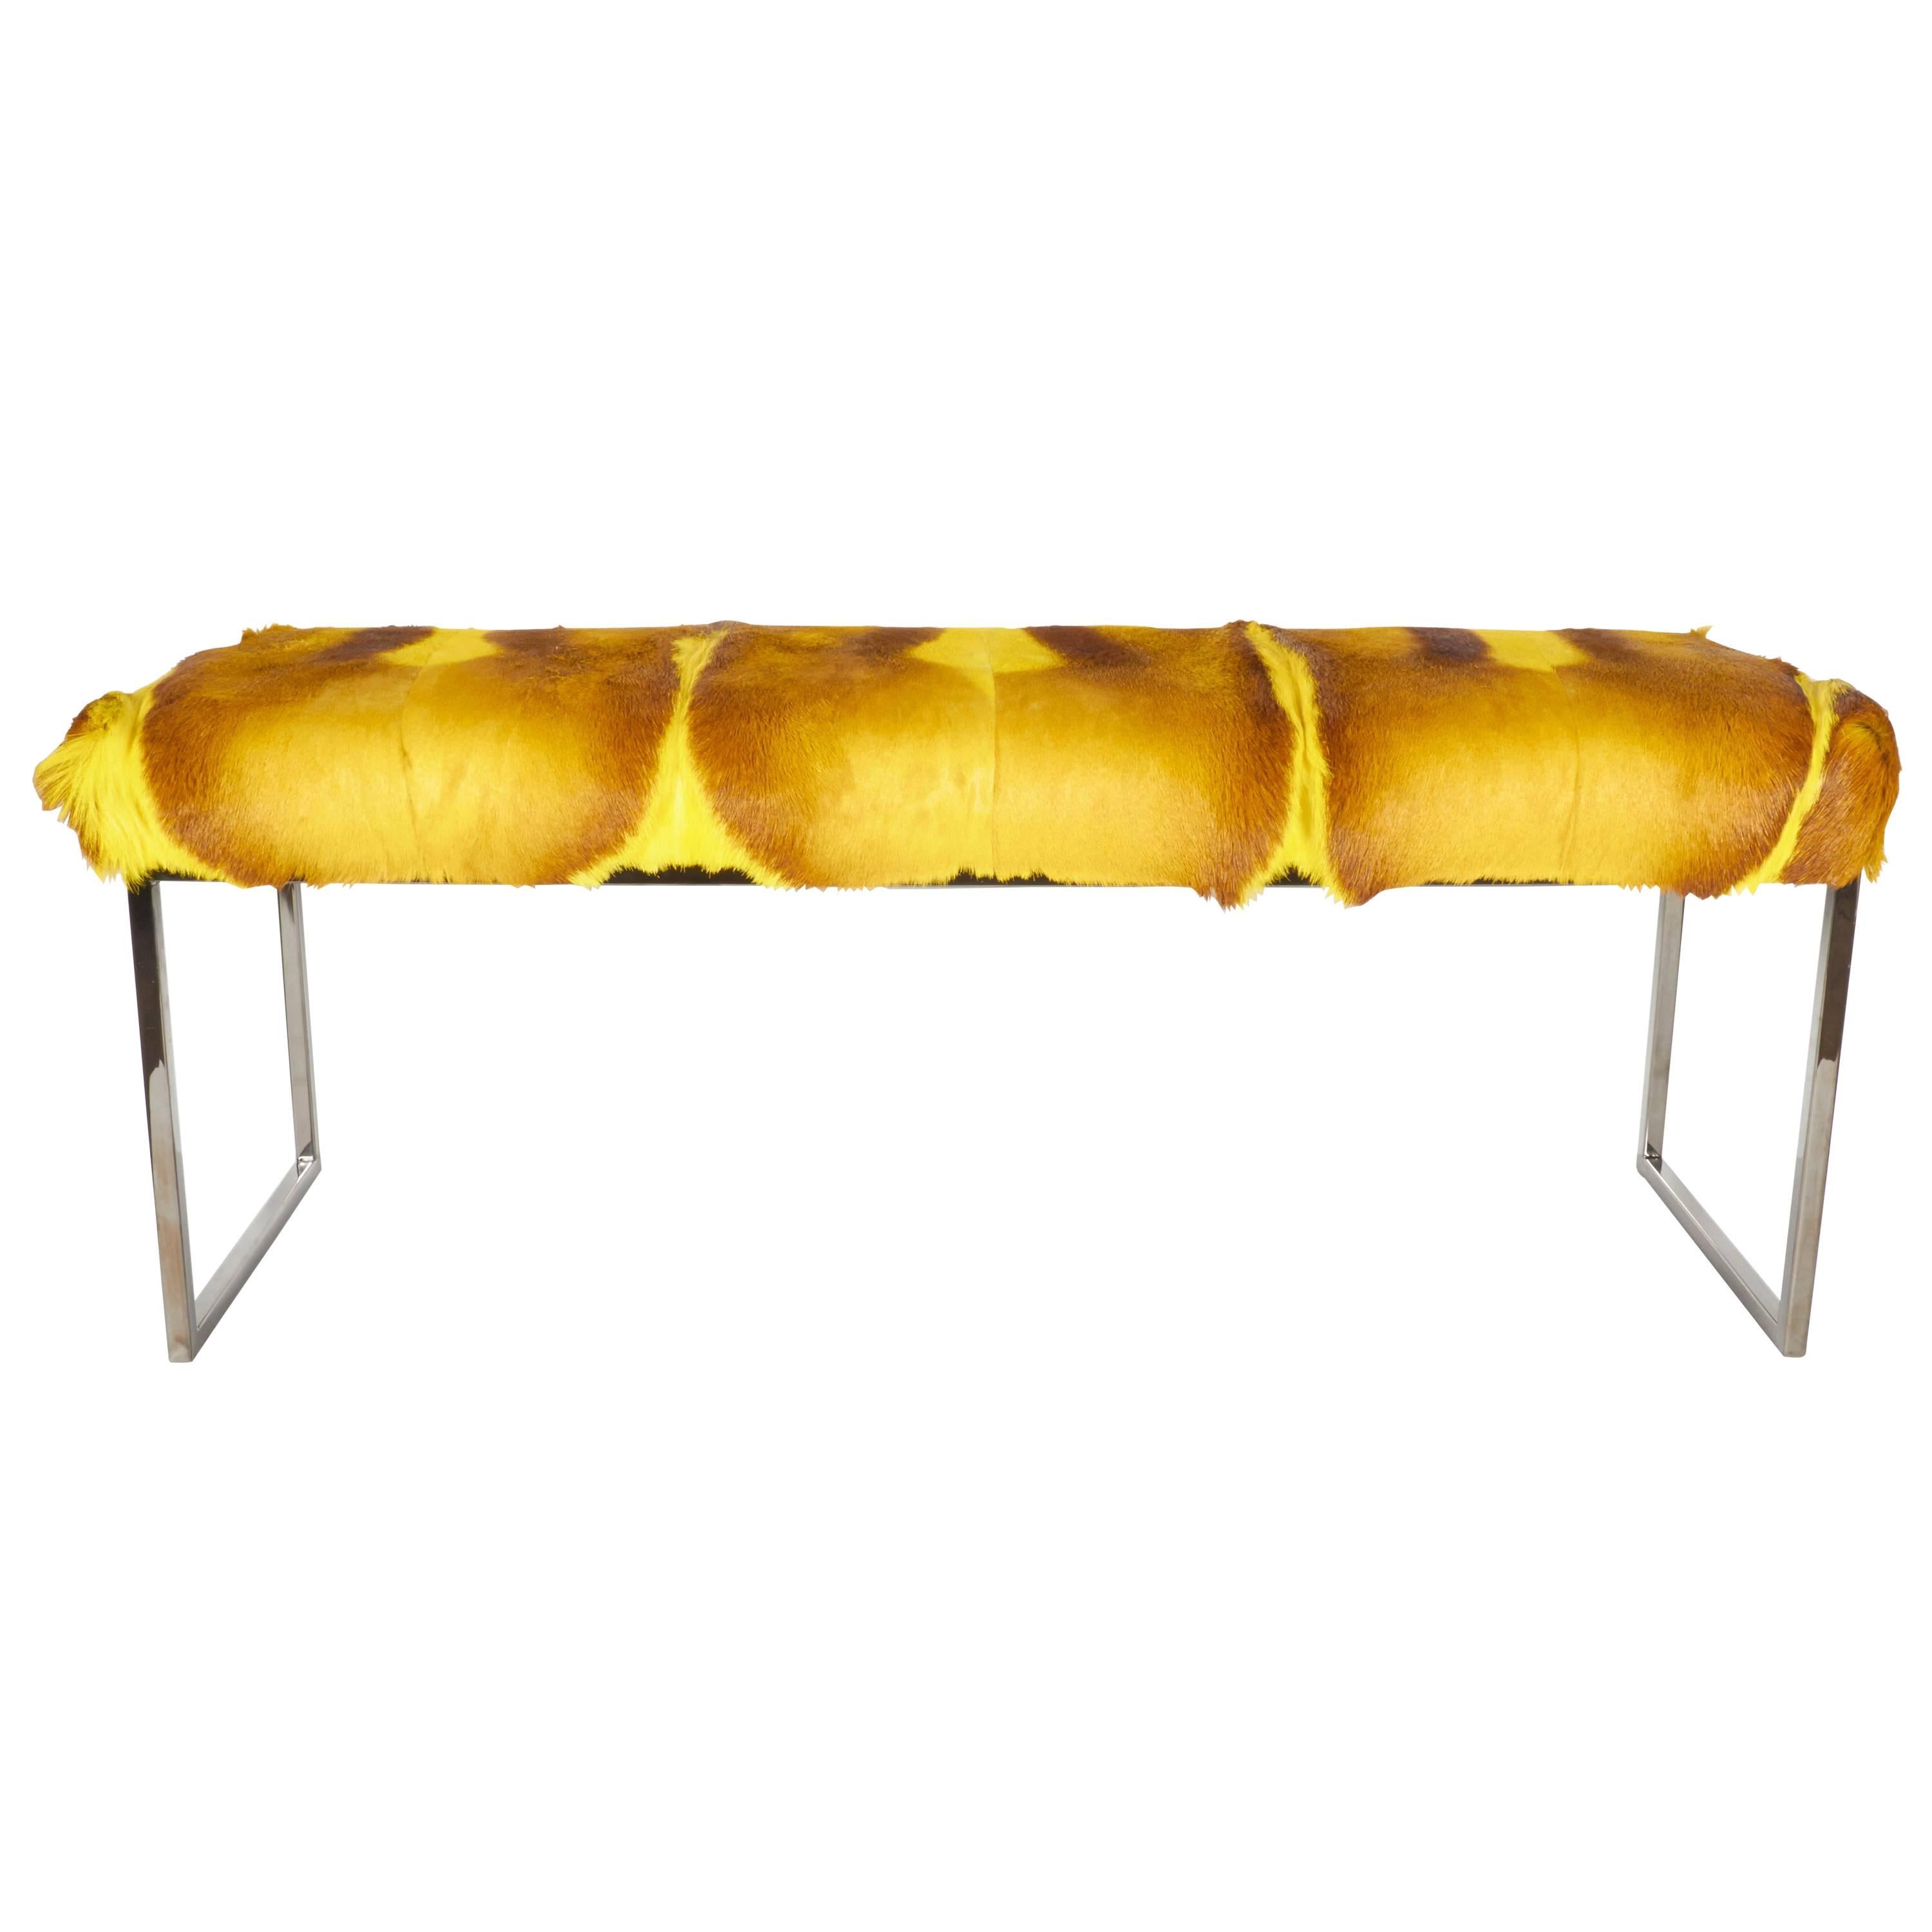 Mid-Century Modern style bench upholstered in stunning African springbok hide. Comprised of several hides featuring four spine details. Hand-dyed in vibrant yellow with varying hues of gold and deep brown. Streamline base in a black nickel finish.